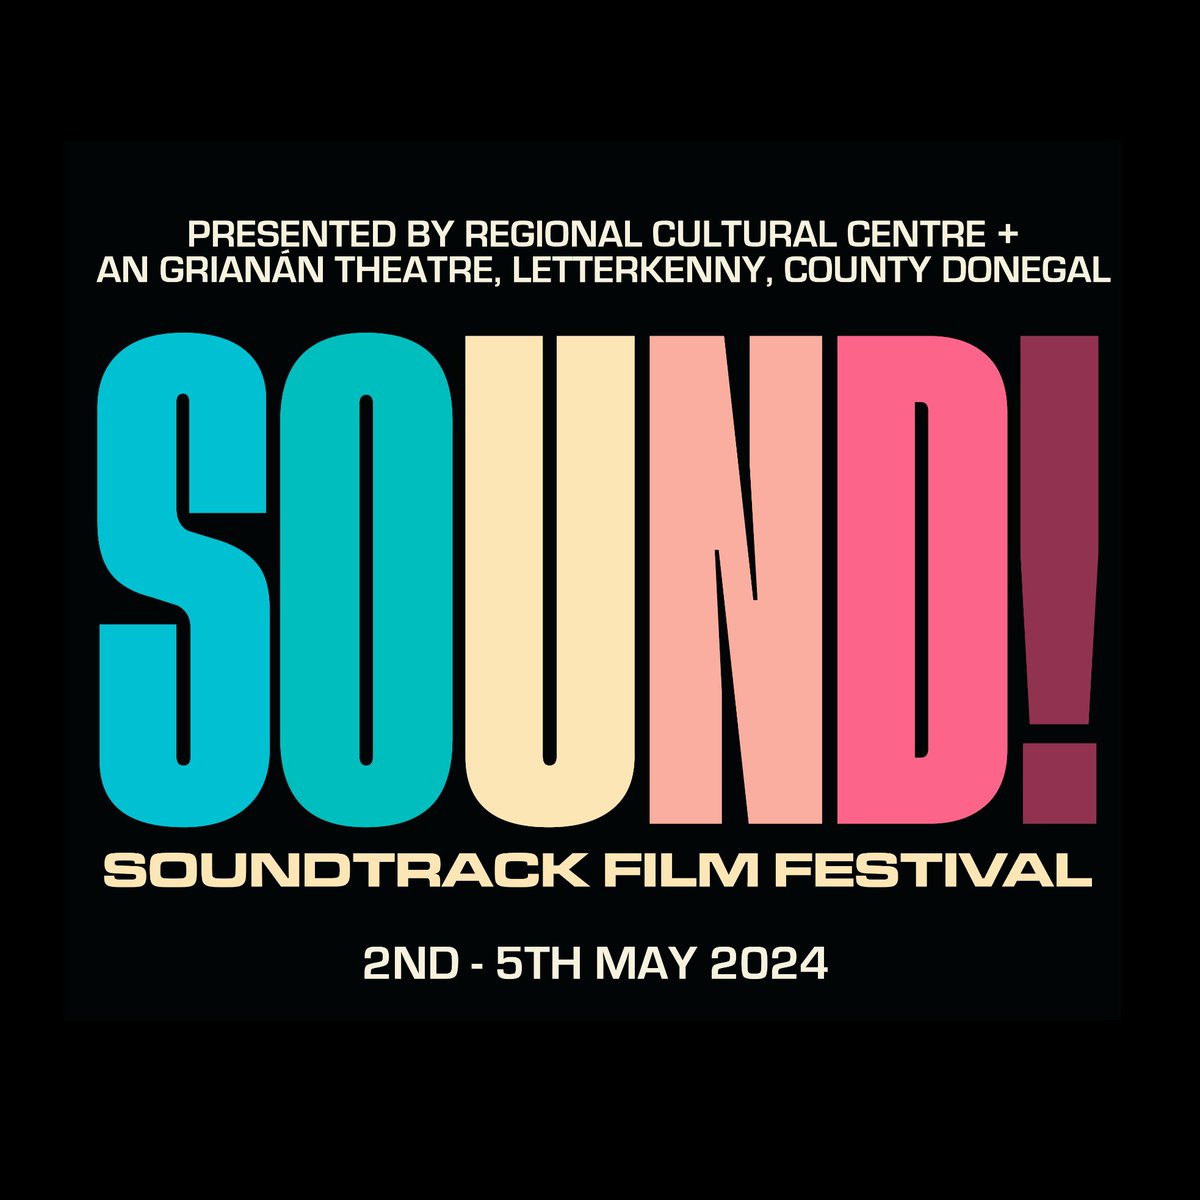 Headed for @CulturalCentre today for Soundtrack Film Festival, Sound! Composing for Film (with @LankumDublin’s Ian Lynch) at 4pm ALL YOU NEED IS DEATH (Dir @paulduanefilm) at 7pm STOP MAKING SENSE at 10pm regionalculturalcentre.com/sound2024/